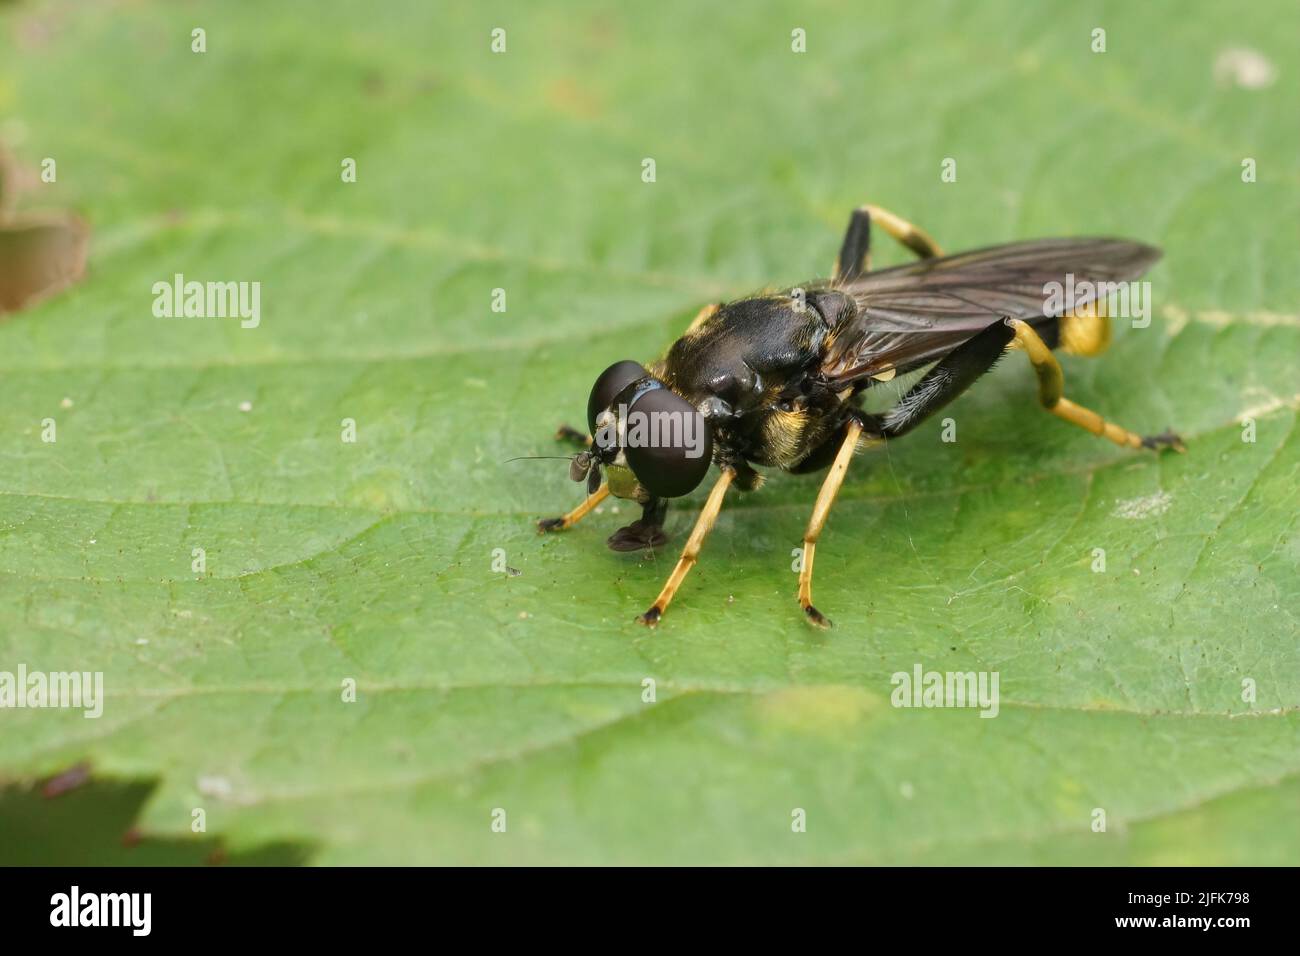 Closeup on a golden-tailed leafwalker hoverfly, Xylota sylvarum sitting on a green leaf in the forest Stock Photo